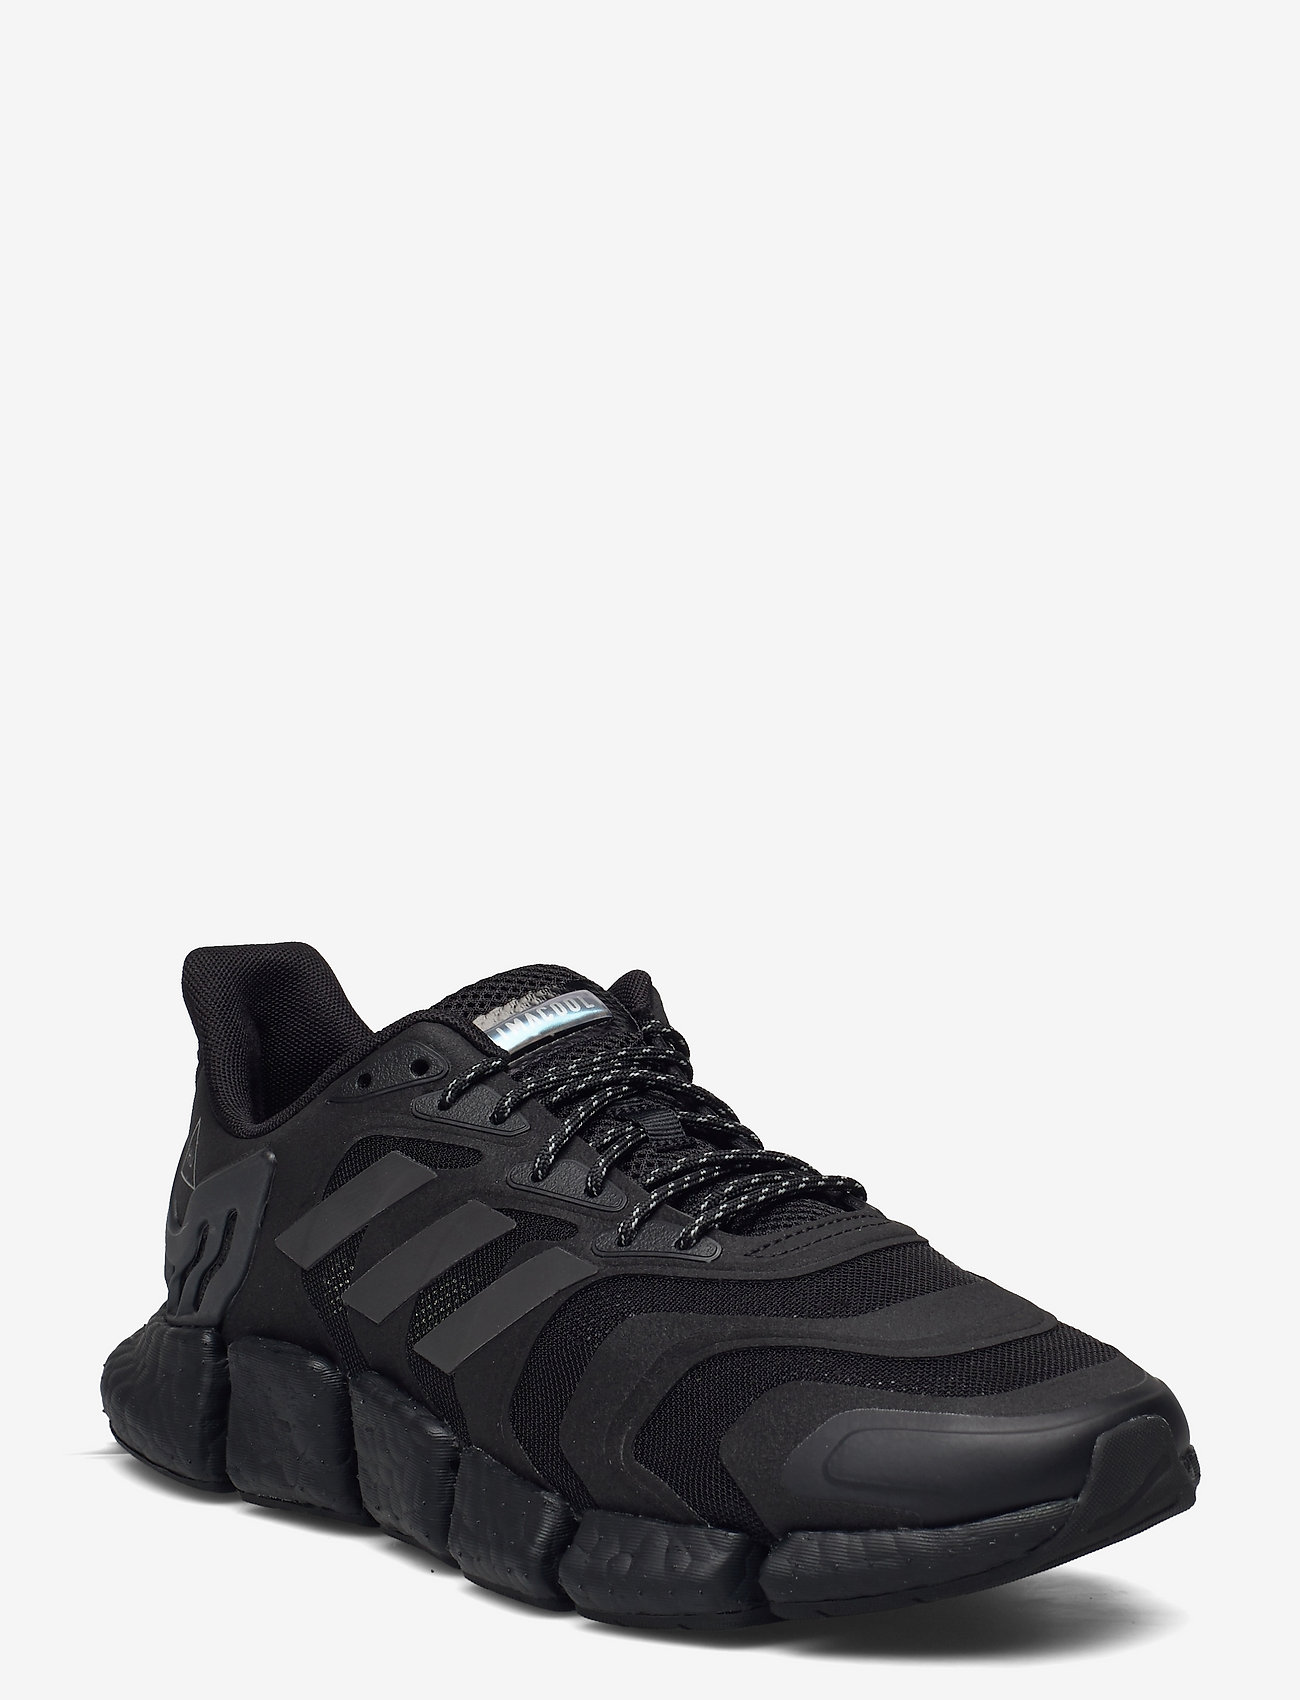 fuse reptiles Ritual adidas Performance Climacool Vento - Running shoes | Boozt.com